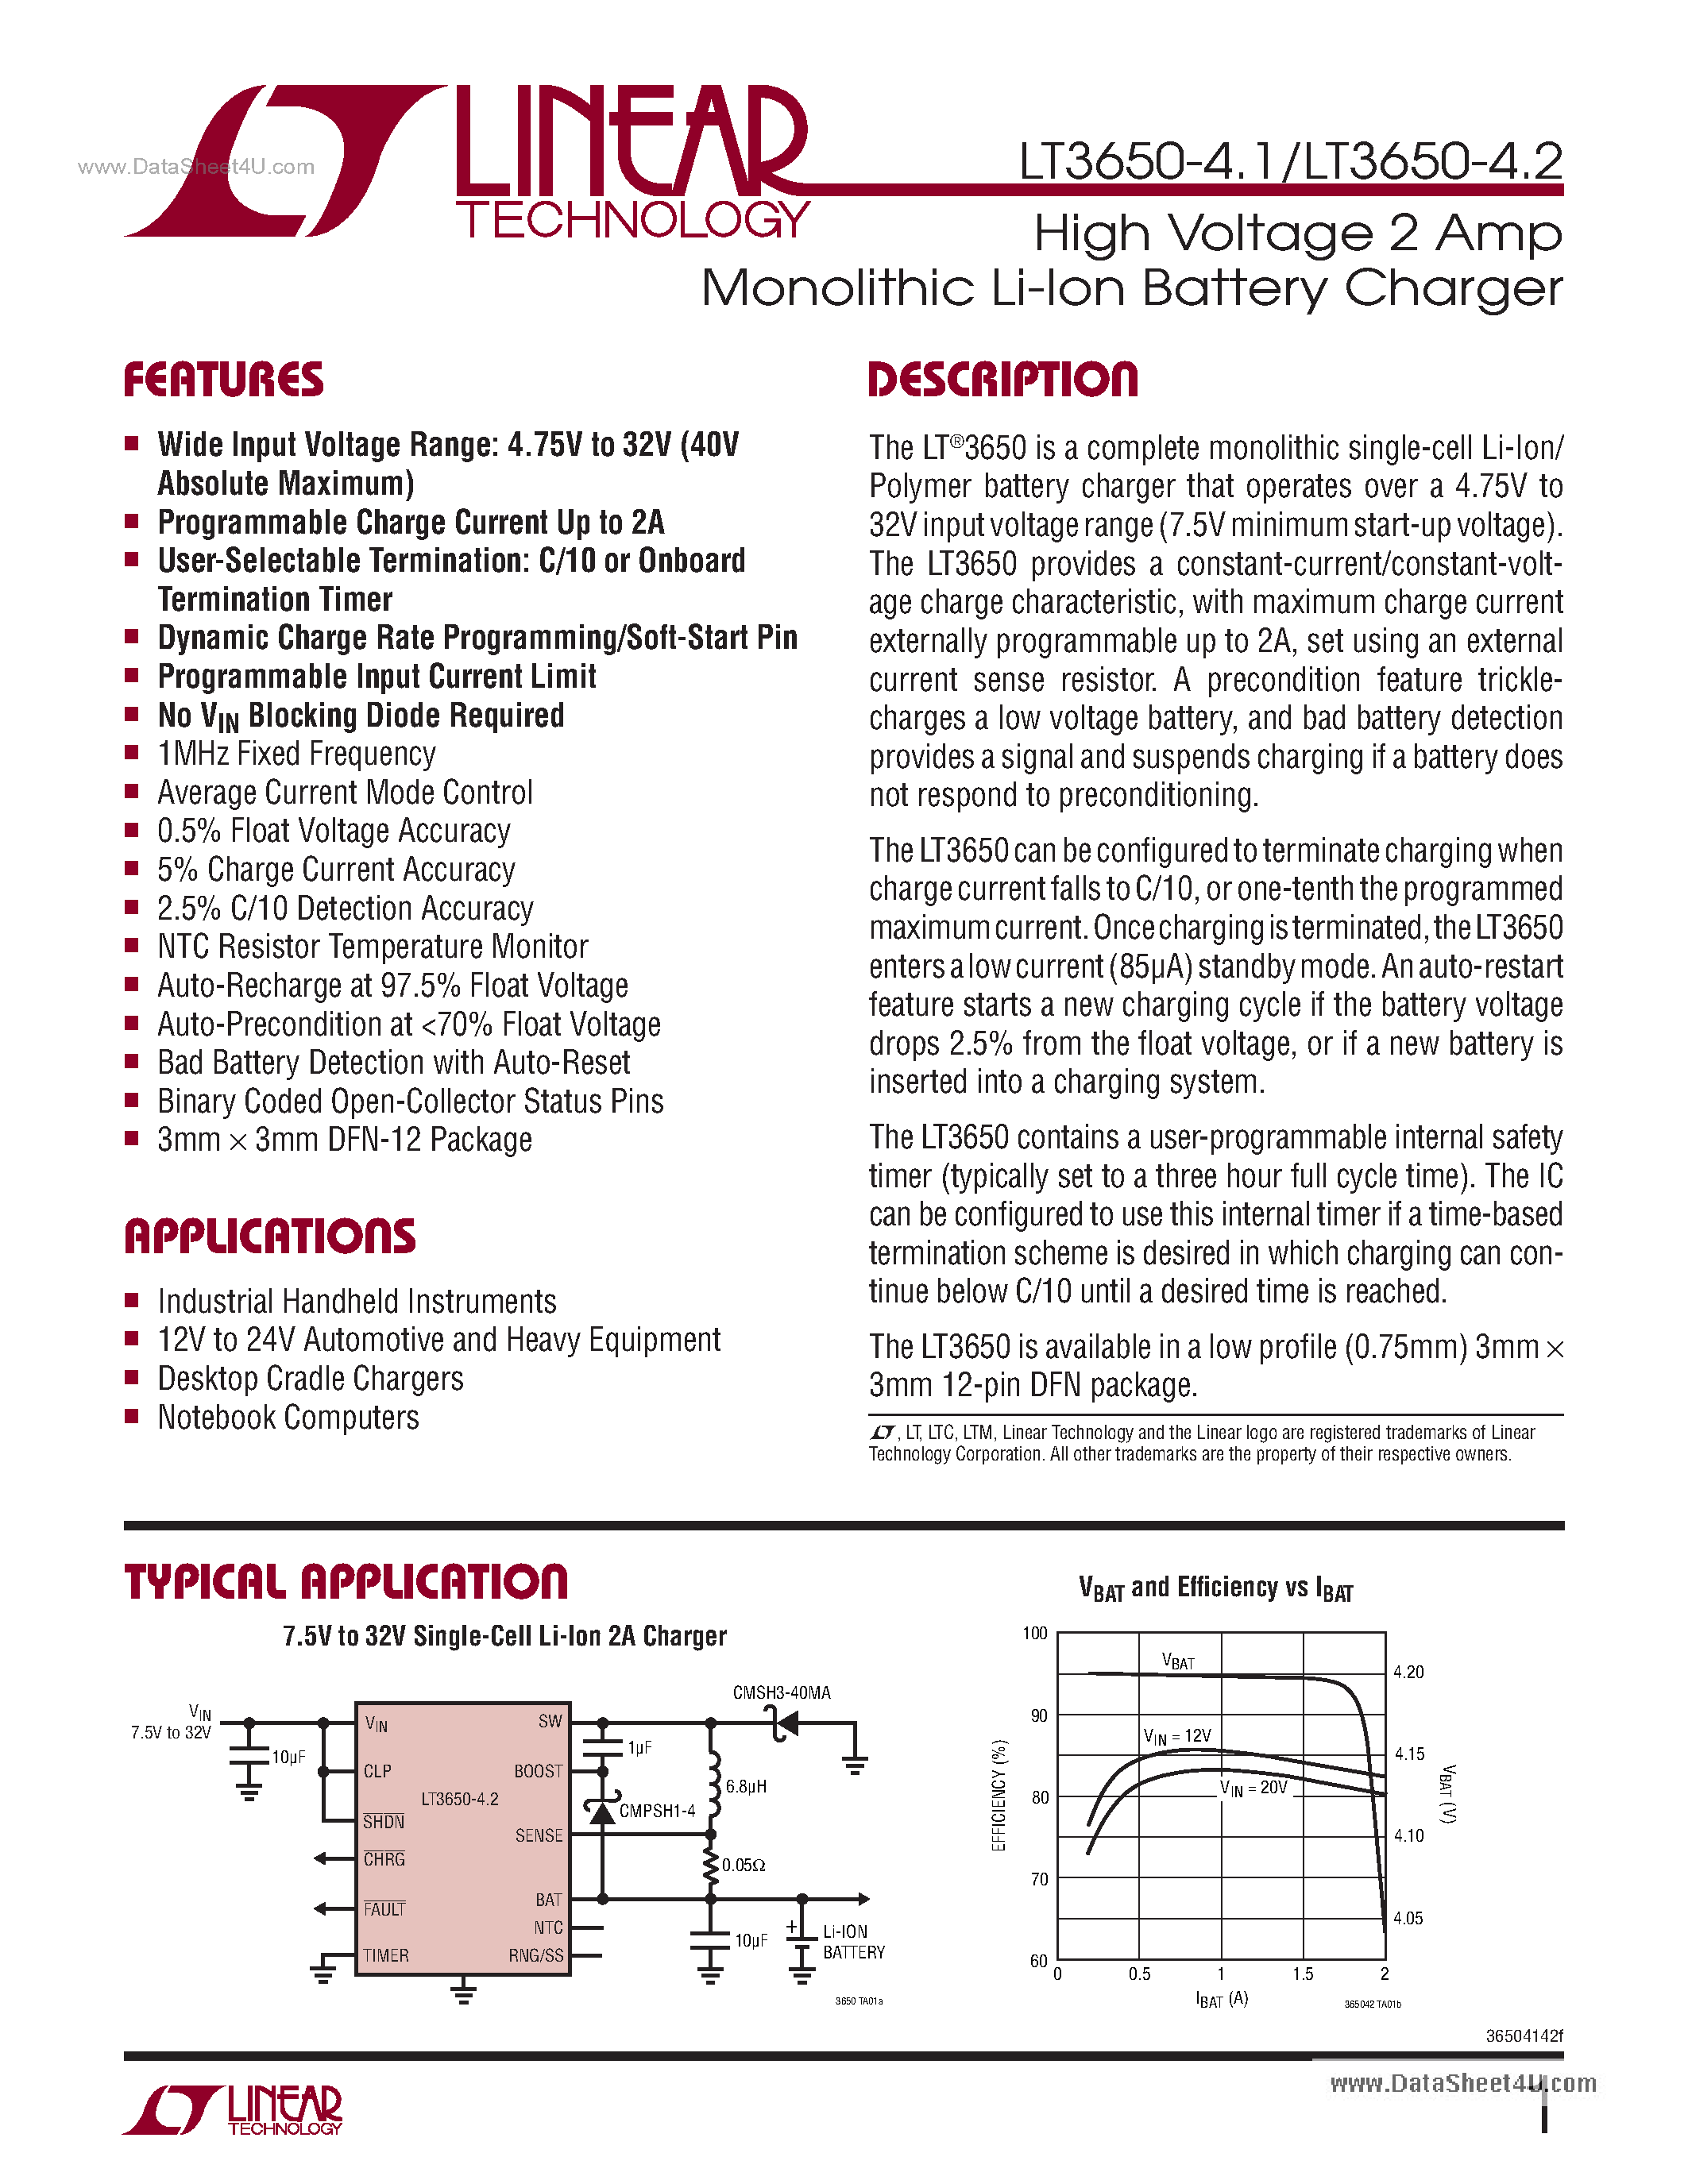 Datasheet LT3650-4.1 - (LT3650-4.1 / -4.2) High Voltage 2 Amp Monolithic Li-Ion Battery Charger page 1